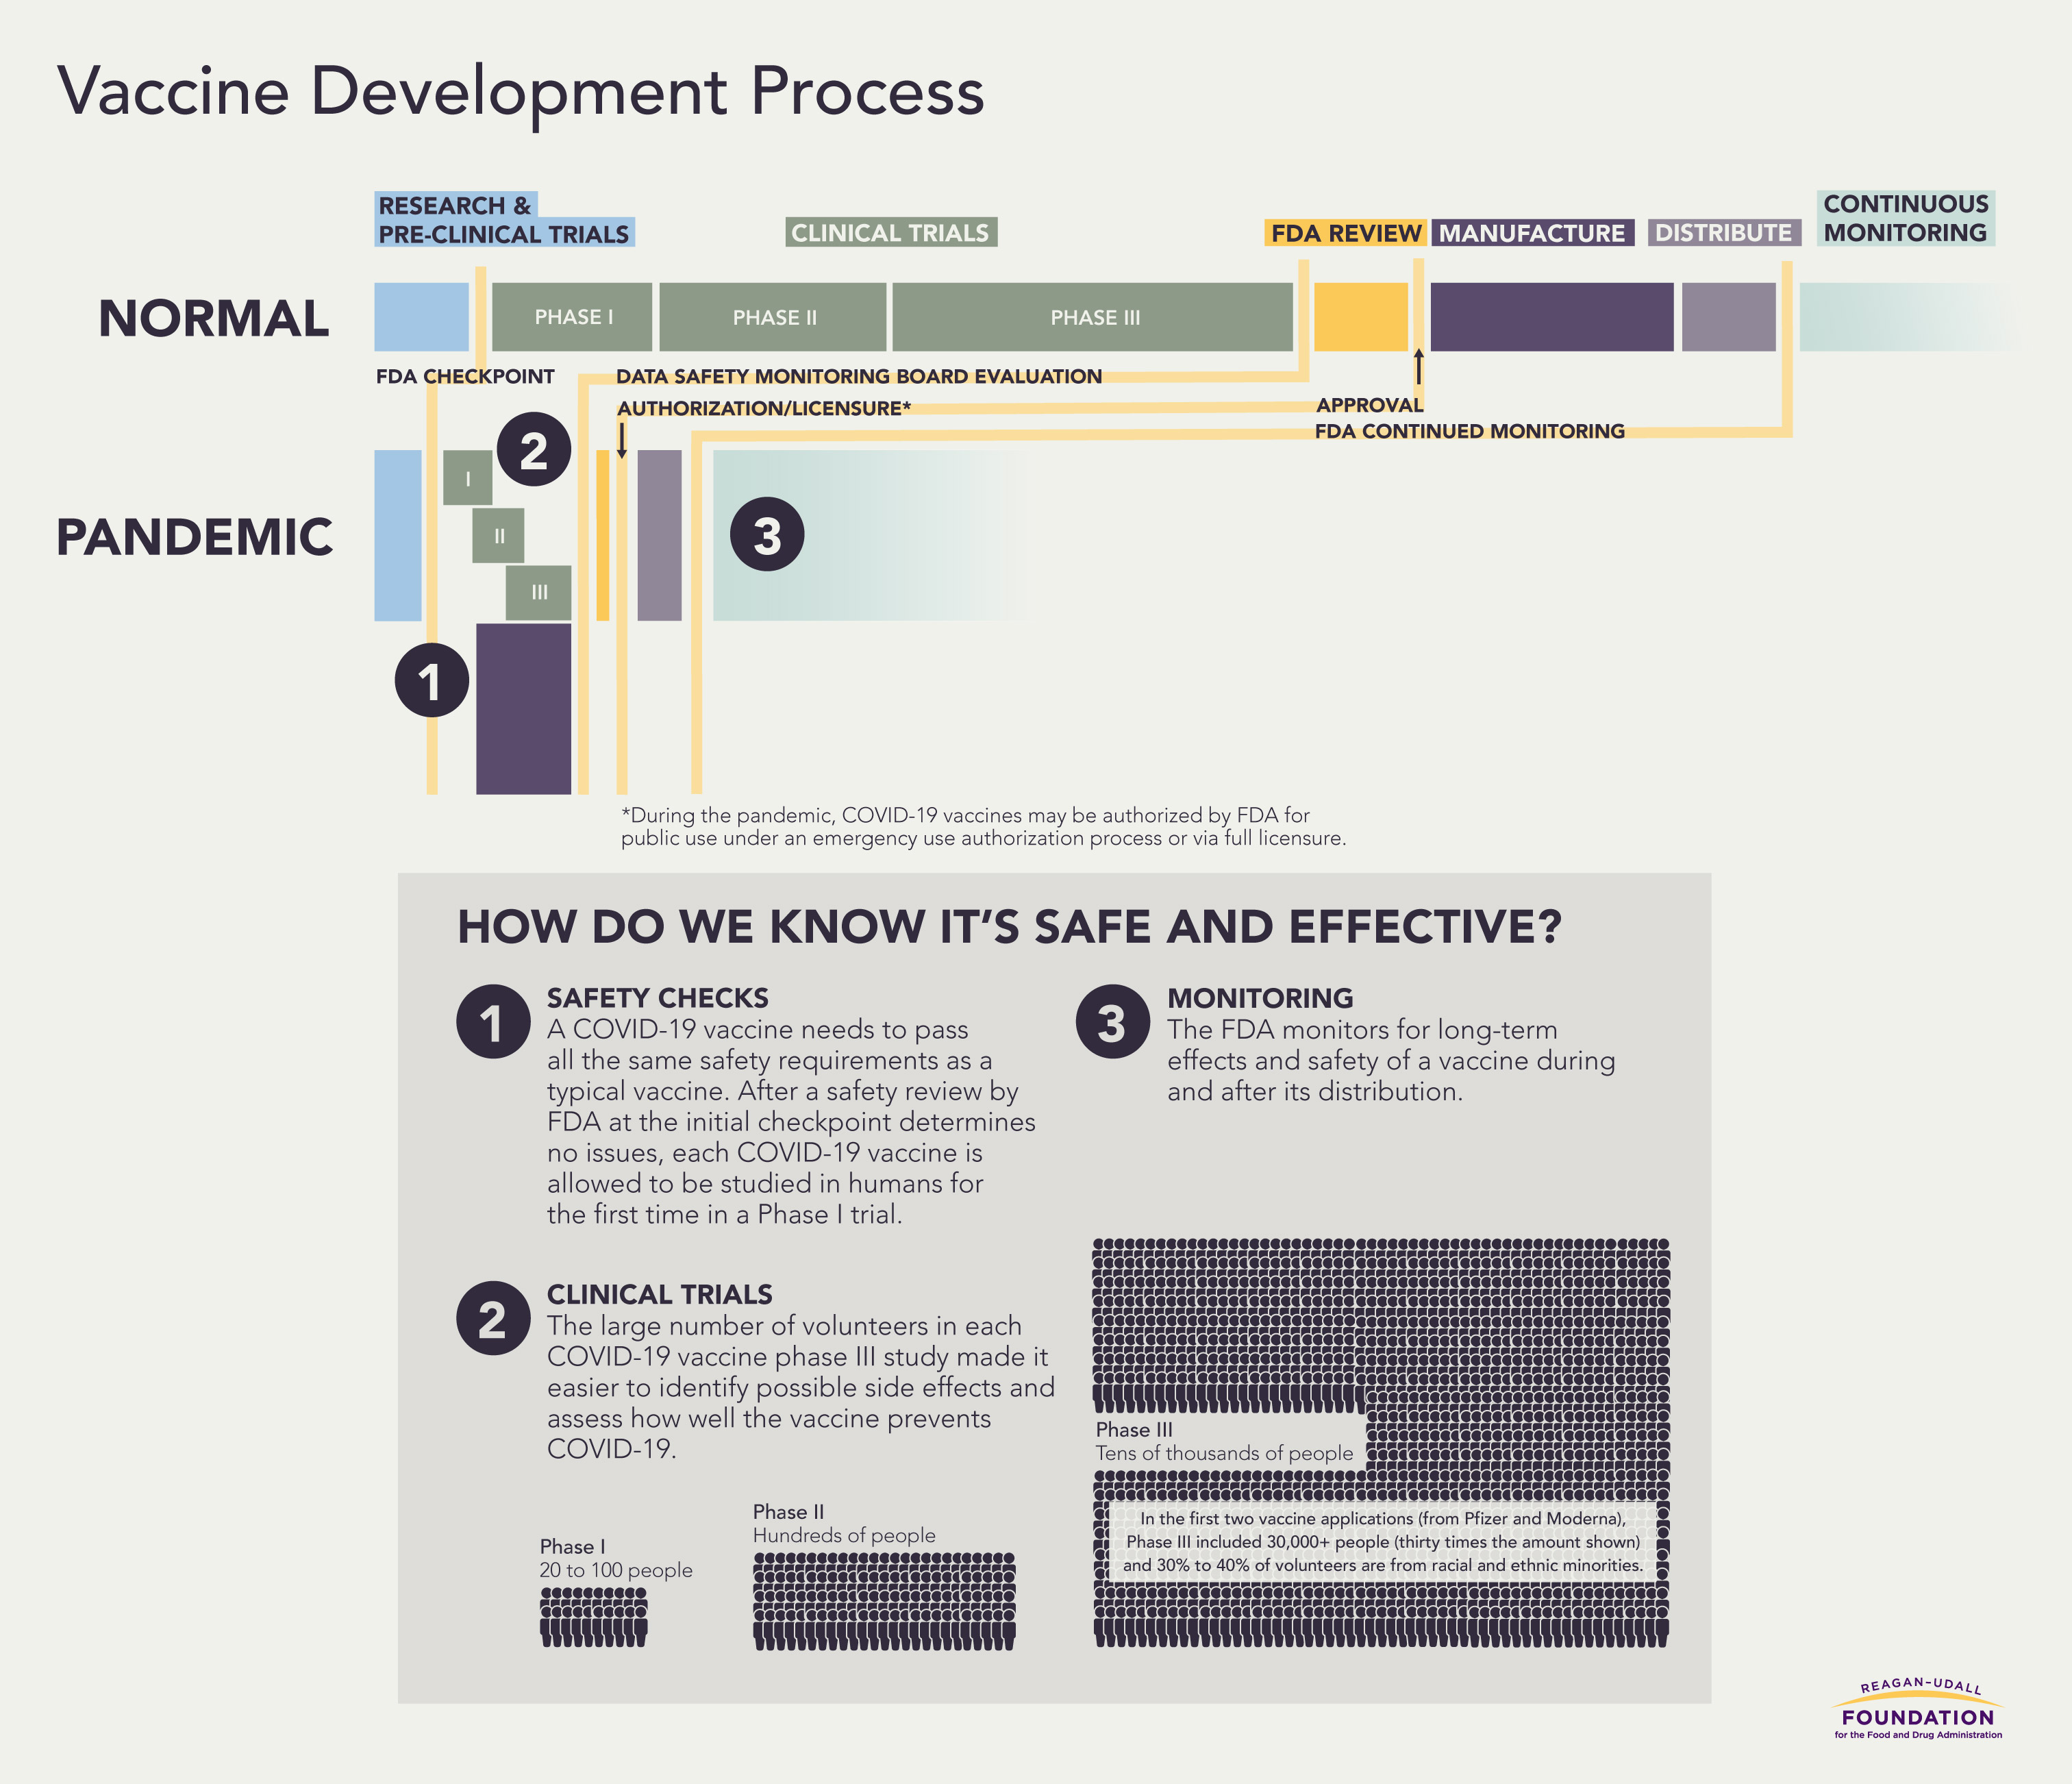 How do we know the Vaccine Development Process was safe and effective?